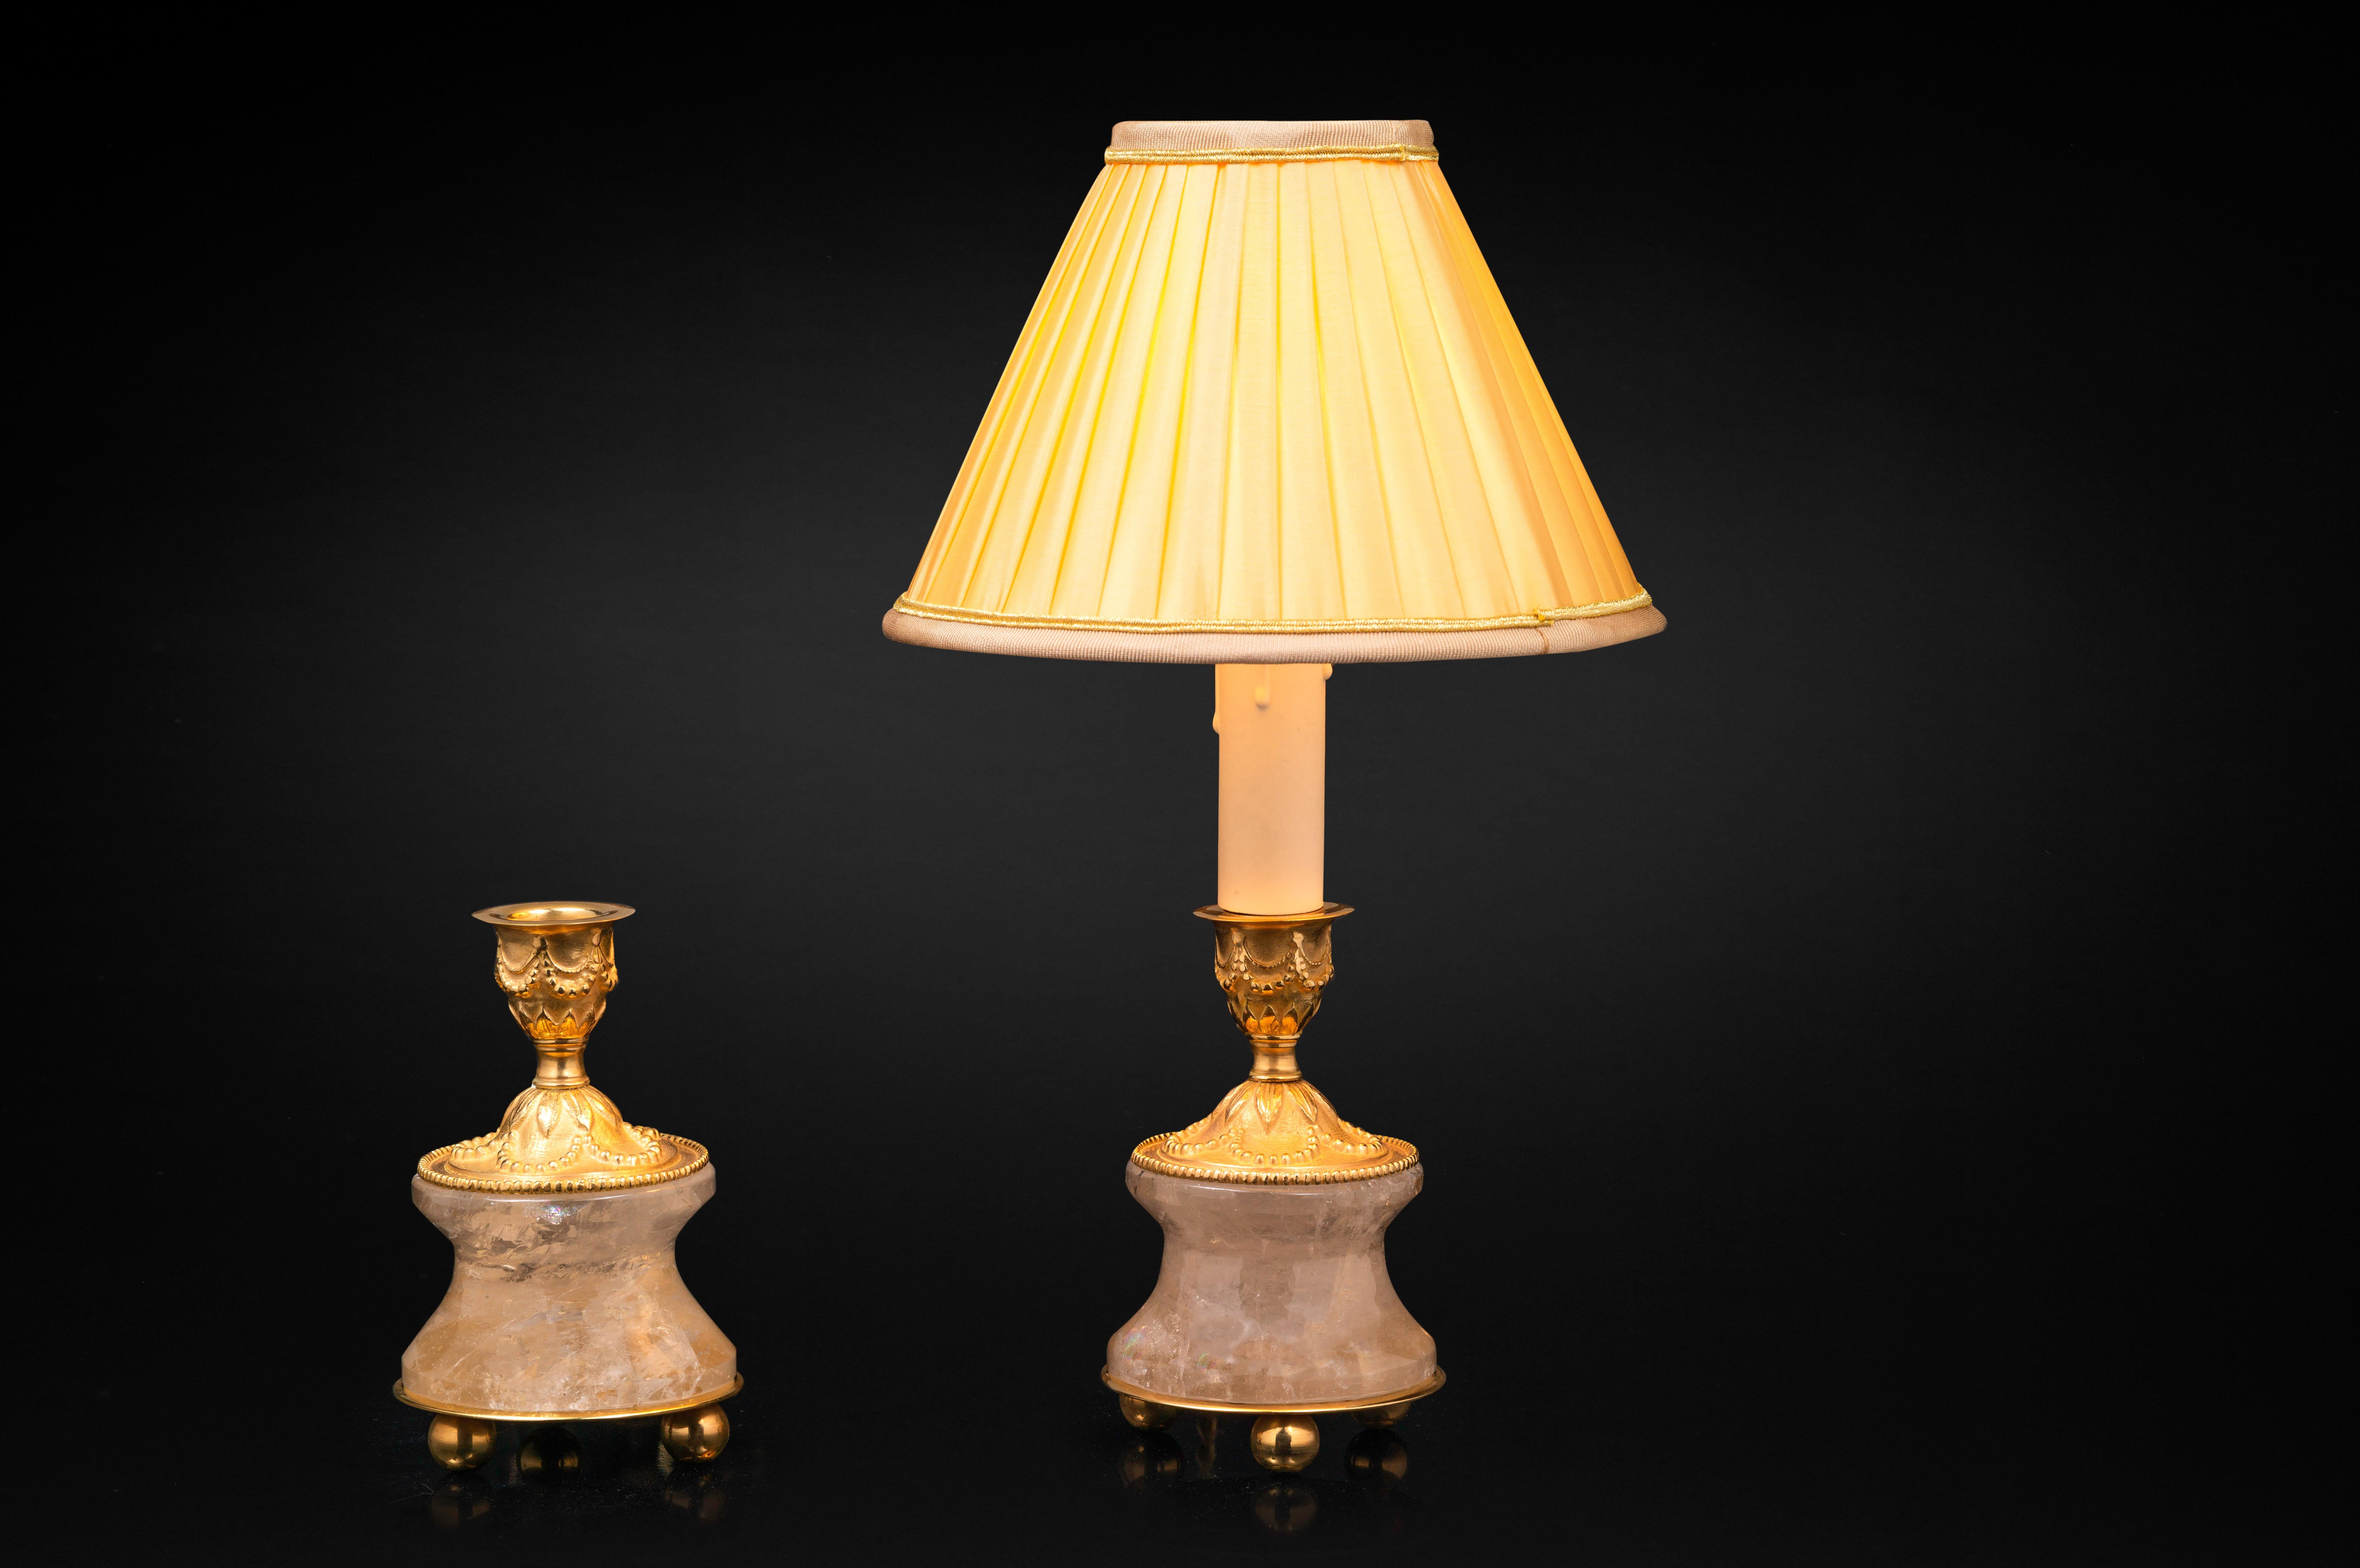 Very chic pair of rock crystal pair of lamps /candlesticks in the typic style of Louis XVI.
So you can used as you want, depend of your interiors and mood.
The base is carved in a single piece of rock crystal stone.
The top is made in France in